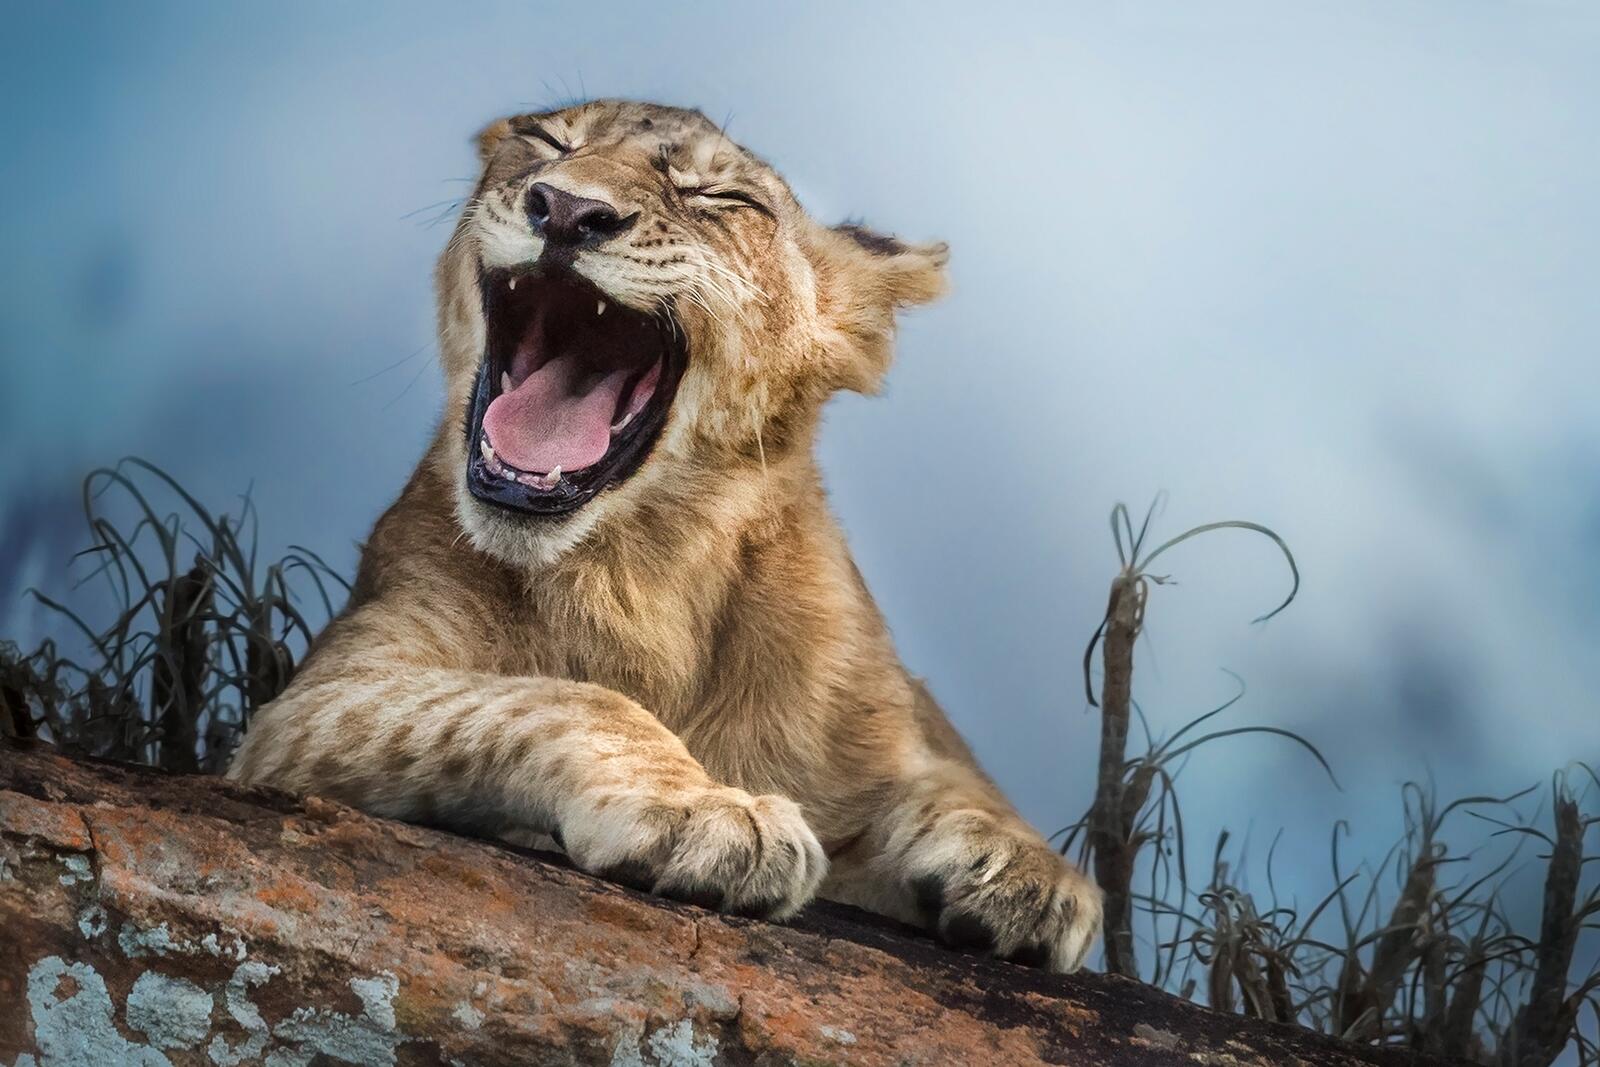 Wallpapers yawn cats lion on the desktop